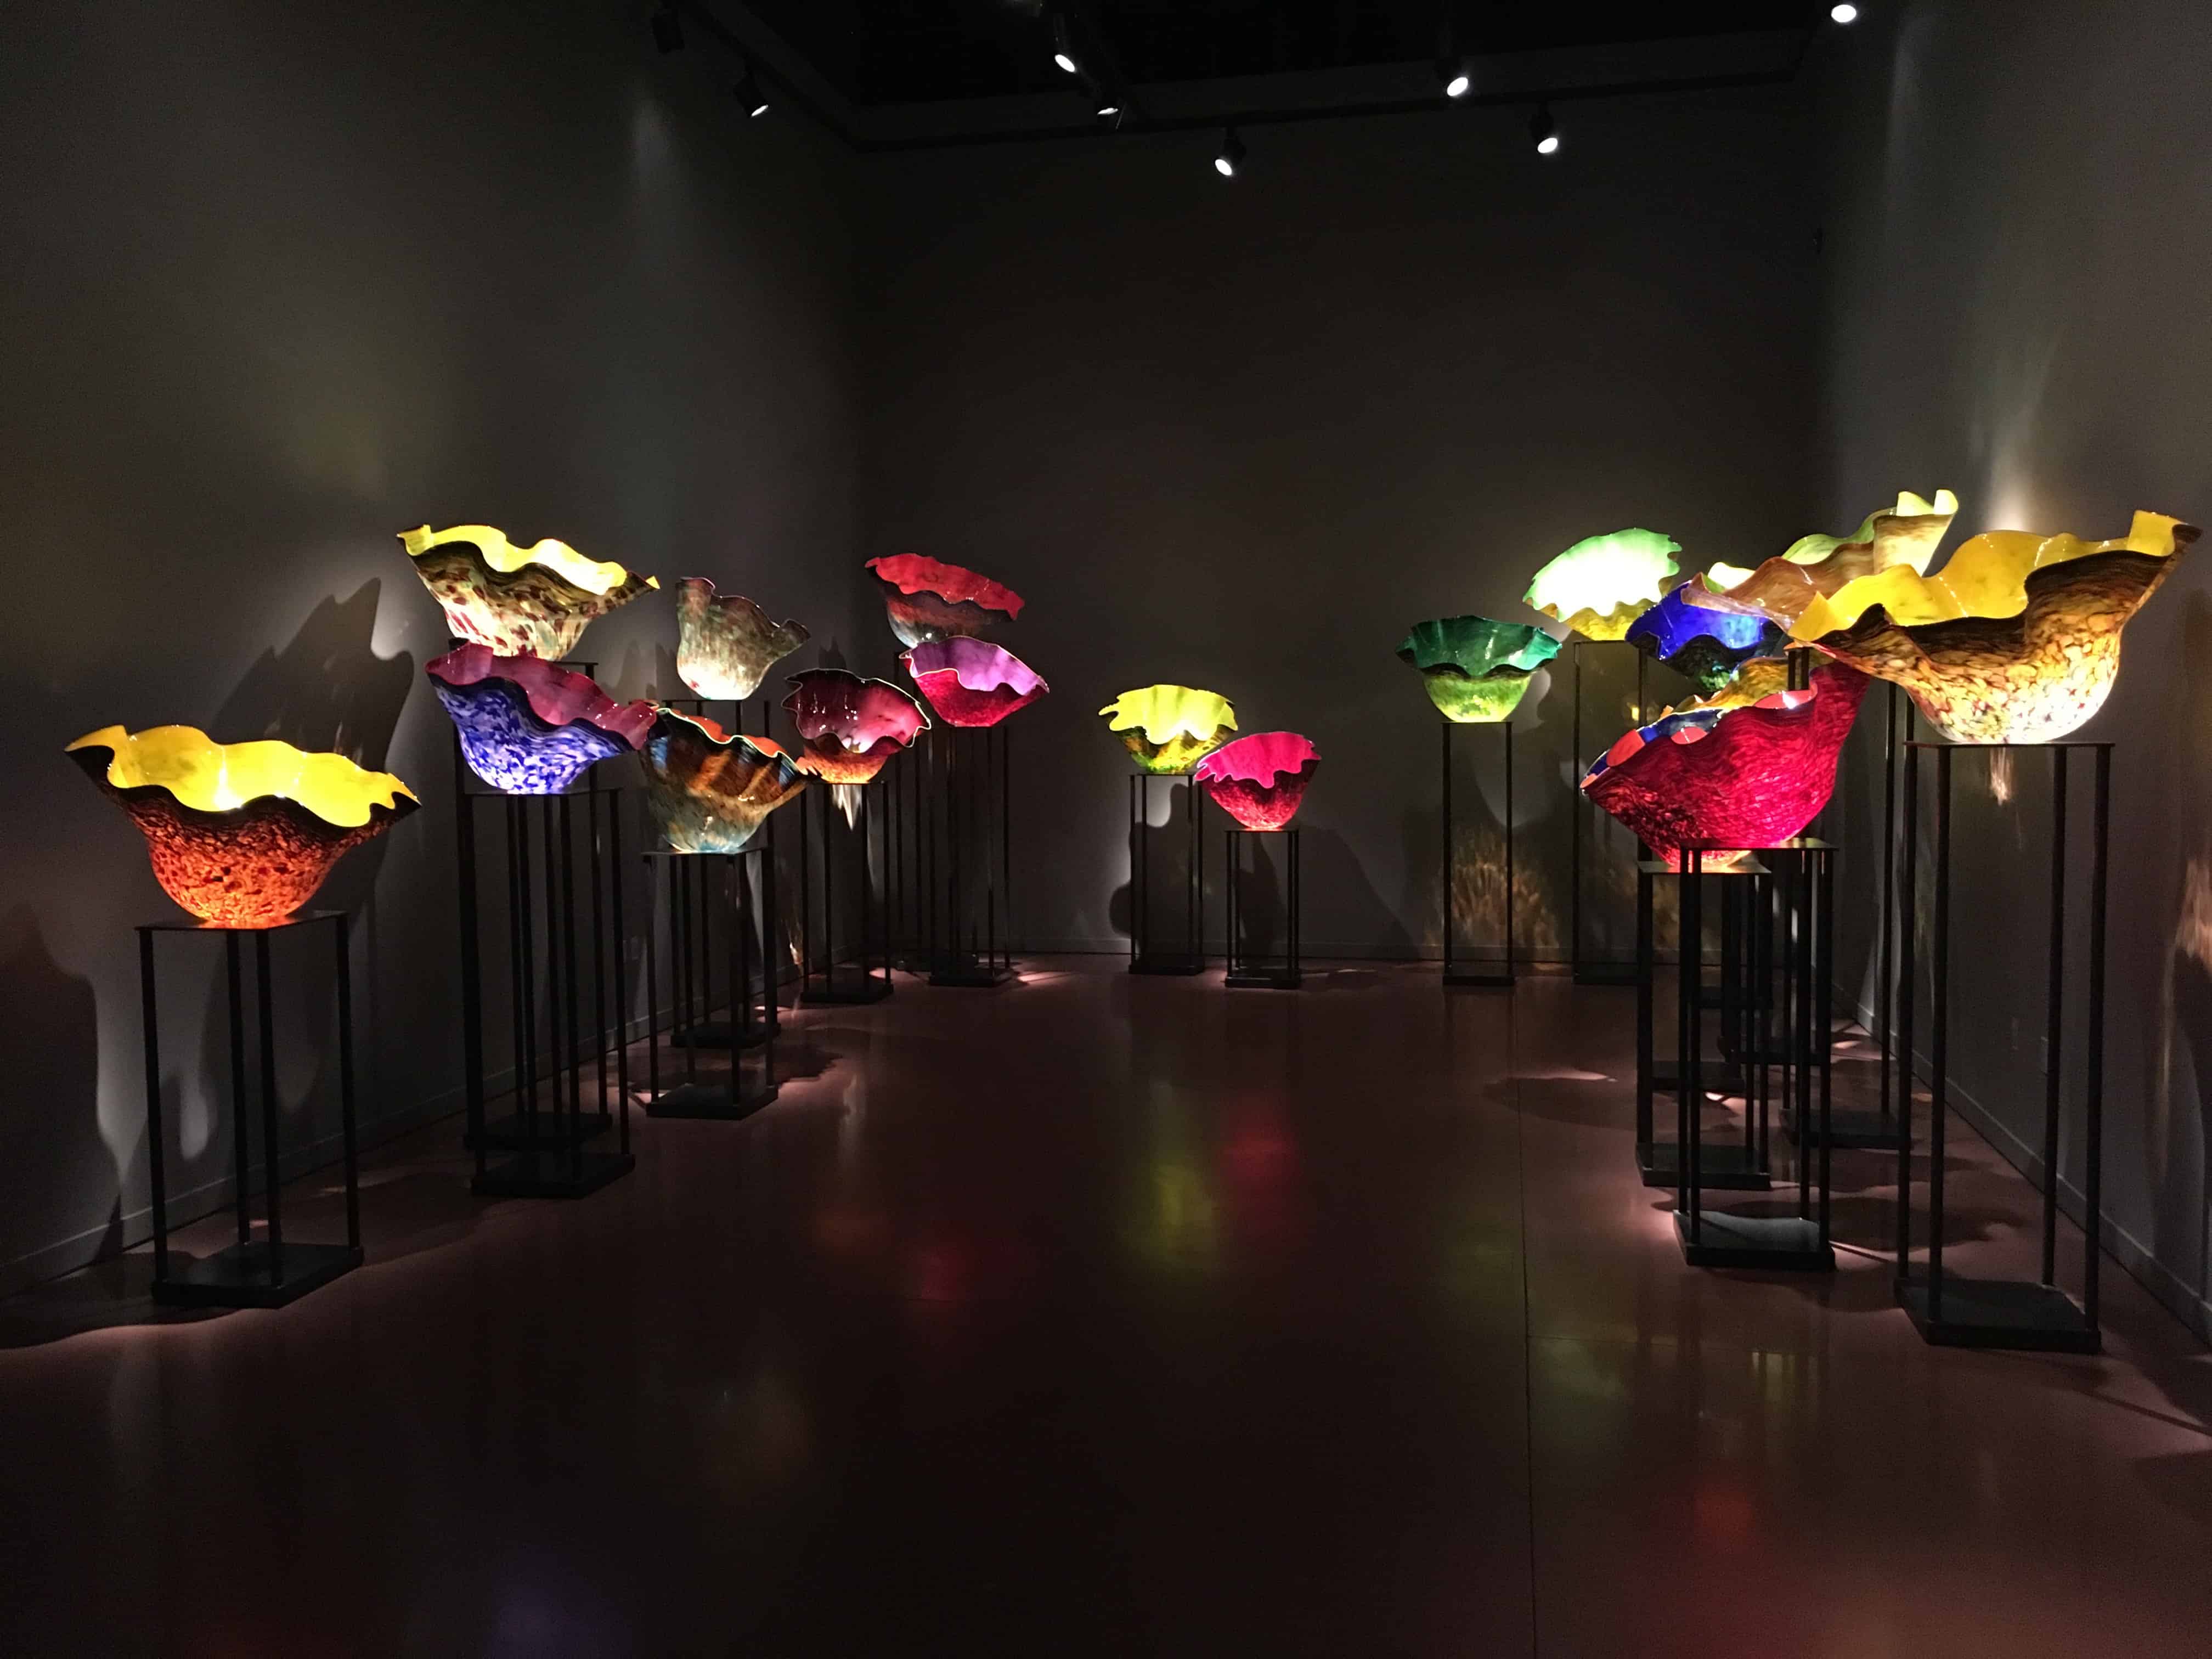 Flowers at Chihuly Garden and Glass in Seattle, Washington